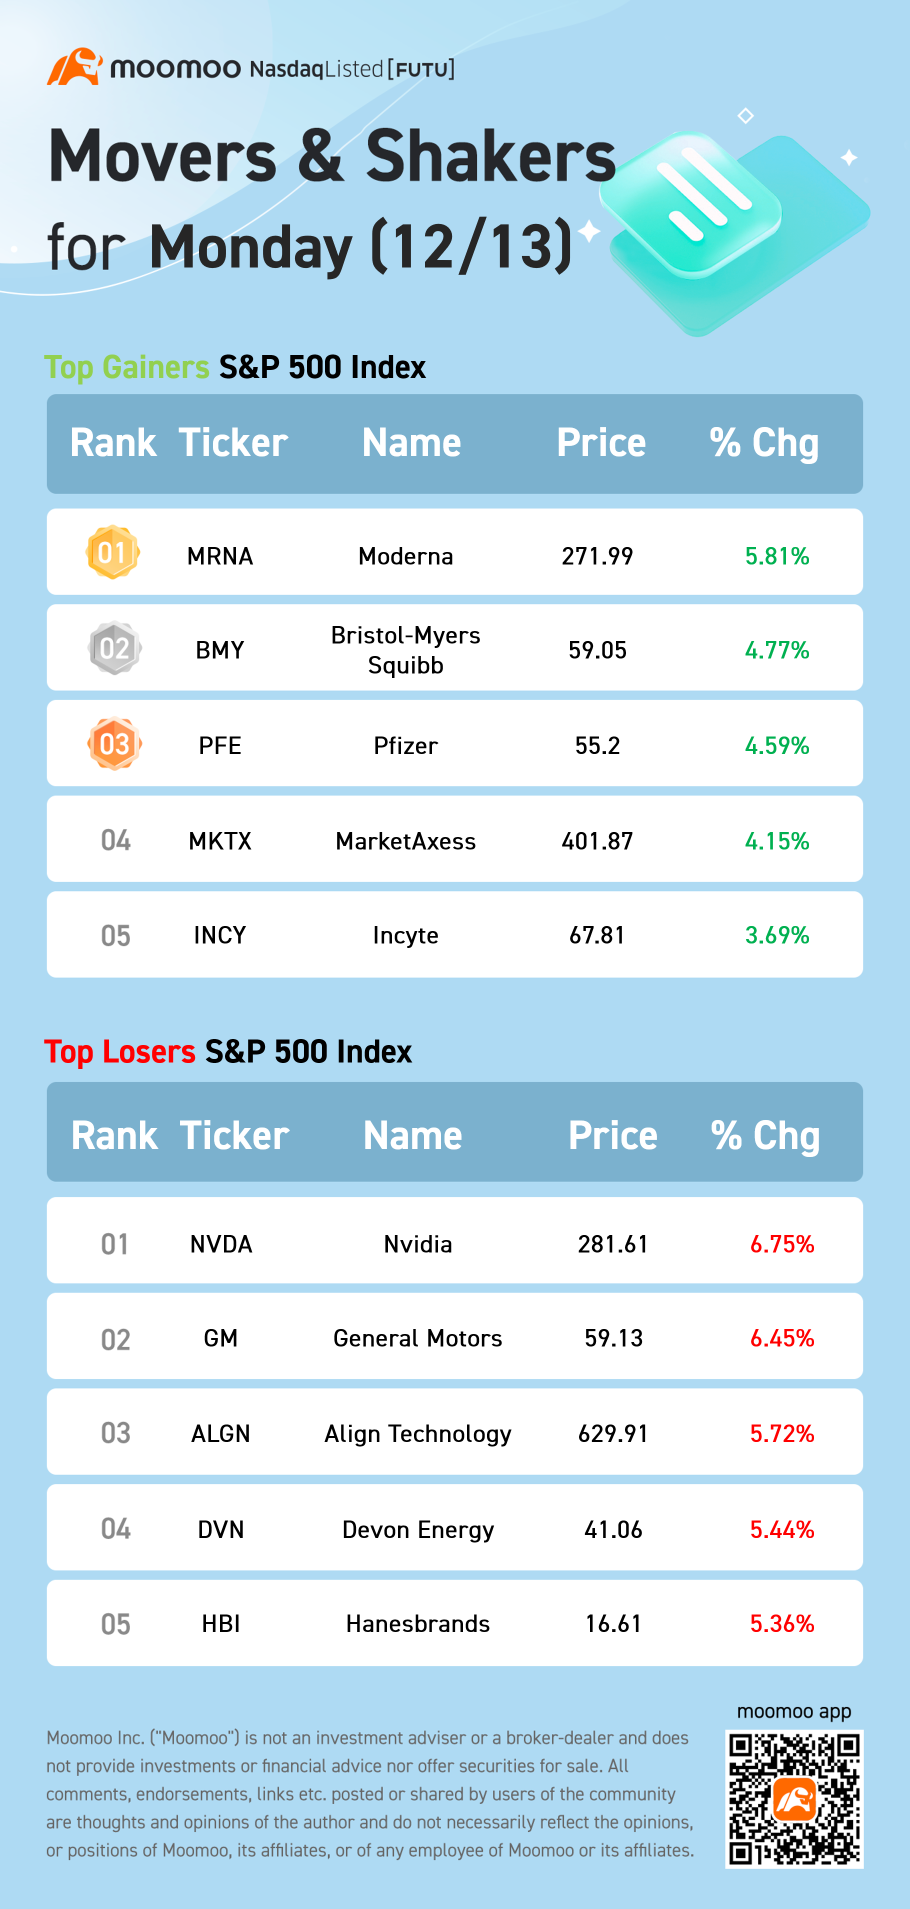 S&P 500 Movers for Monday (12/13)